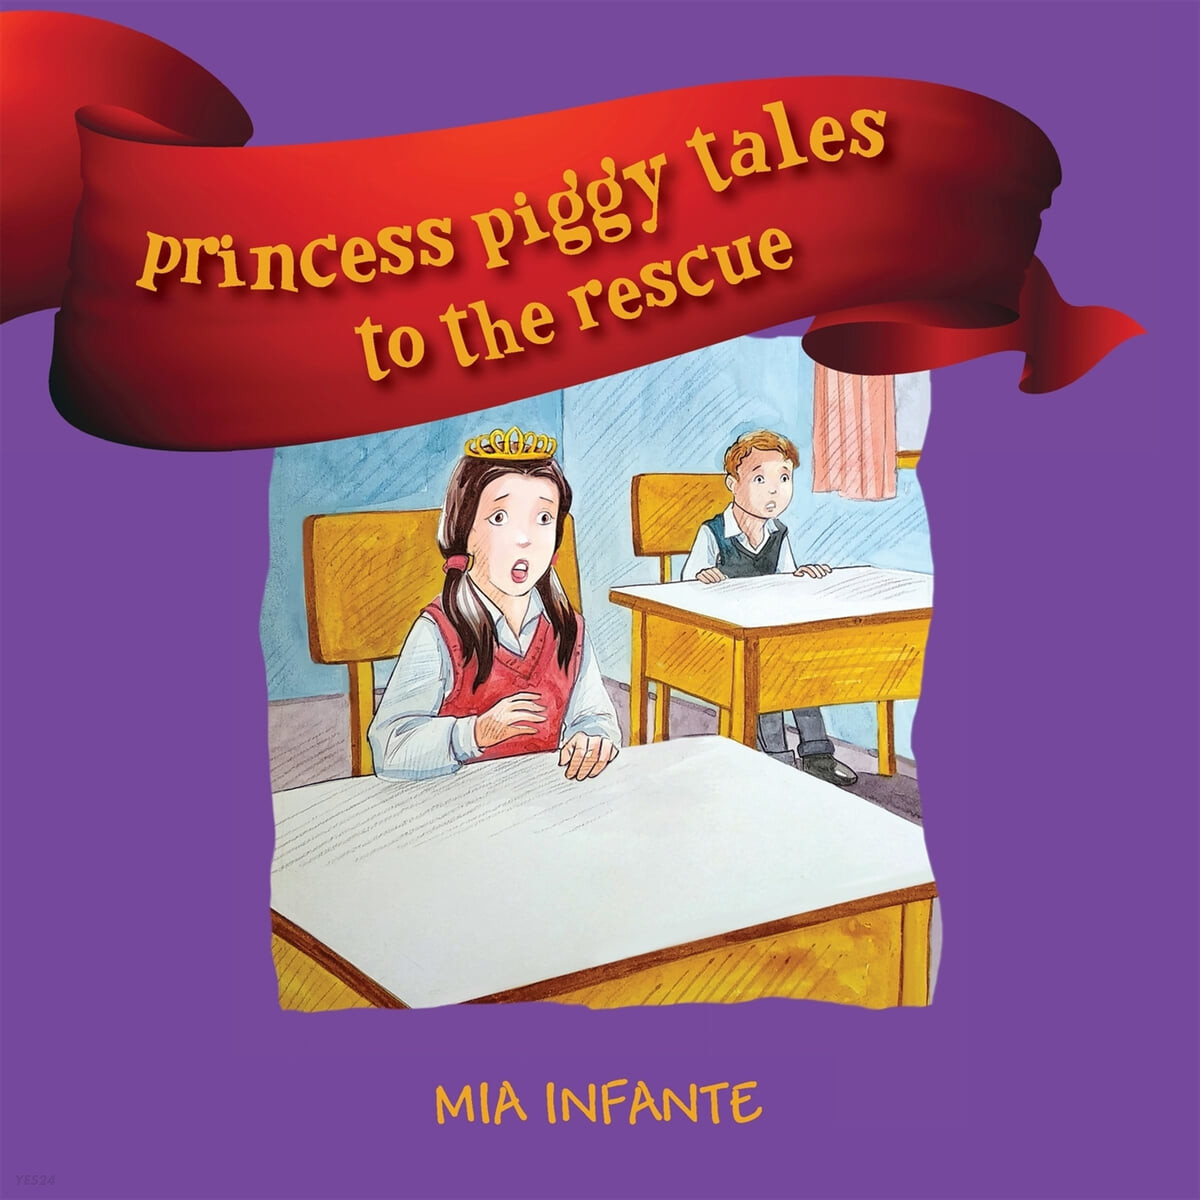 Princess Piggy Tales to the Rescue